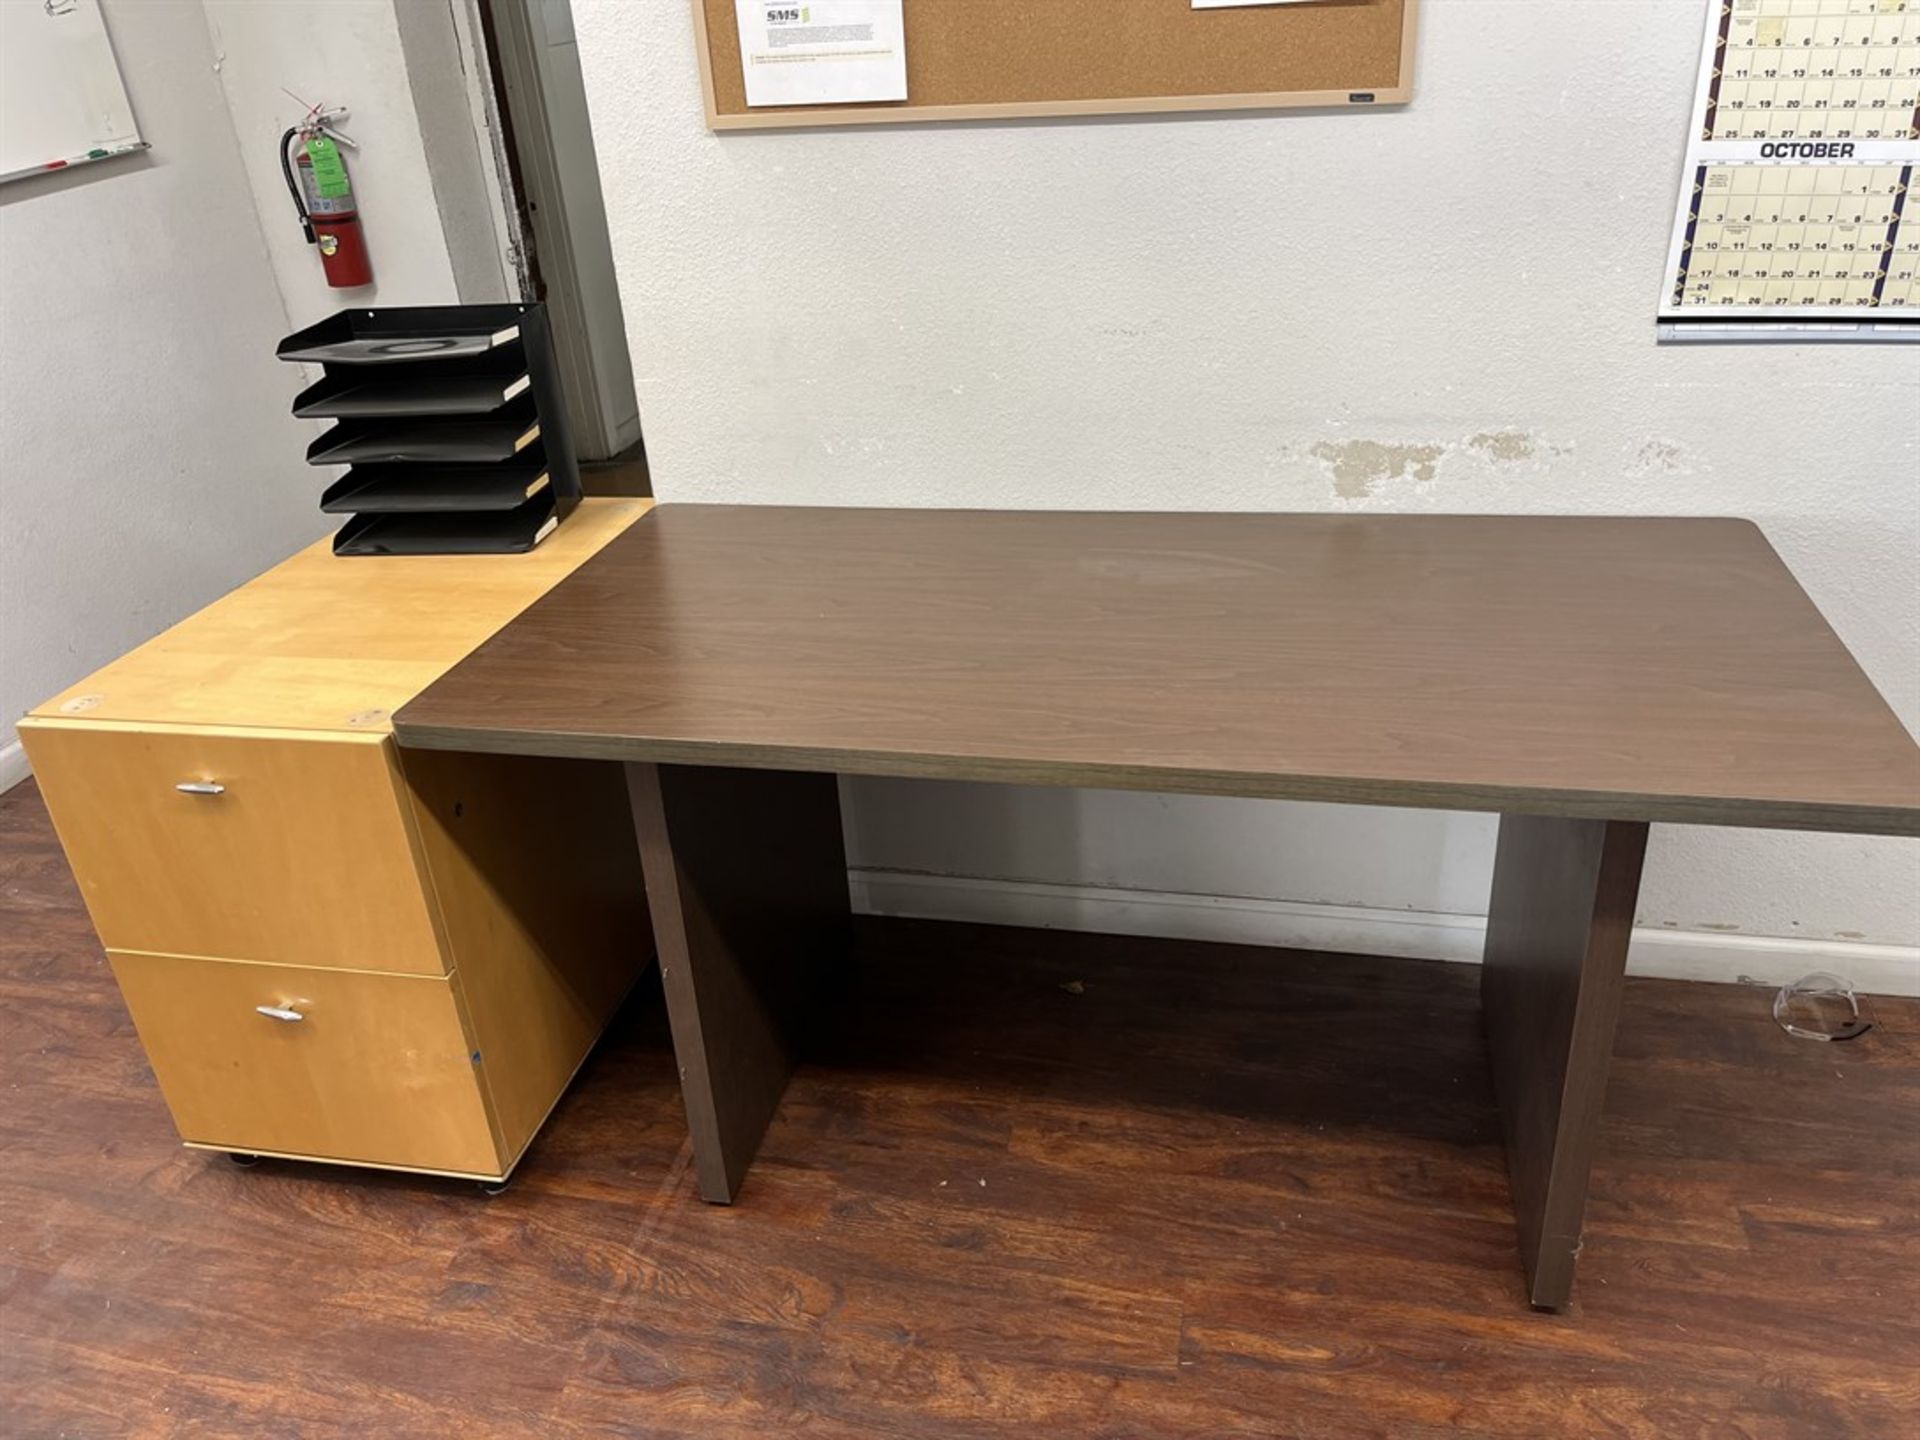 Lot consisting of Desk, Table, File Cabinet (Located in IT Building) - Image 2 of 2